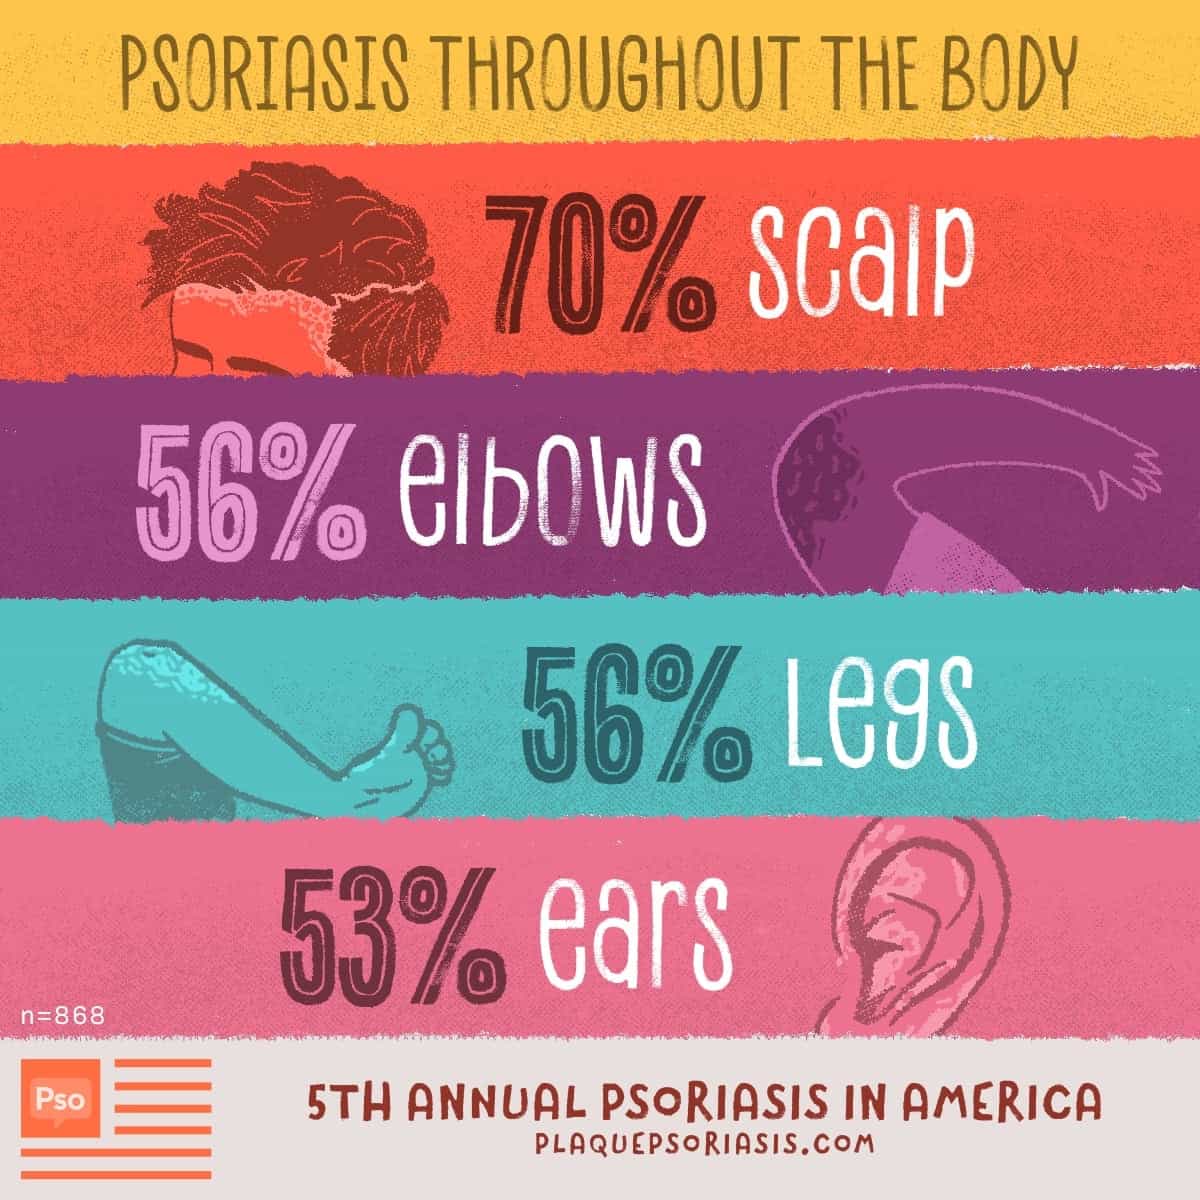 A diagram showing specific body parts that psoriasis impacts including scalp, elbows, legs and ears.